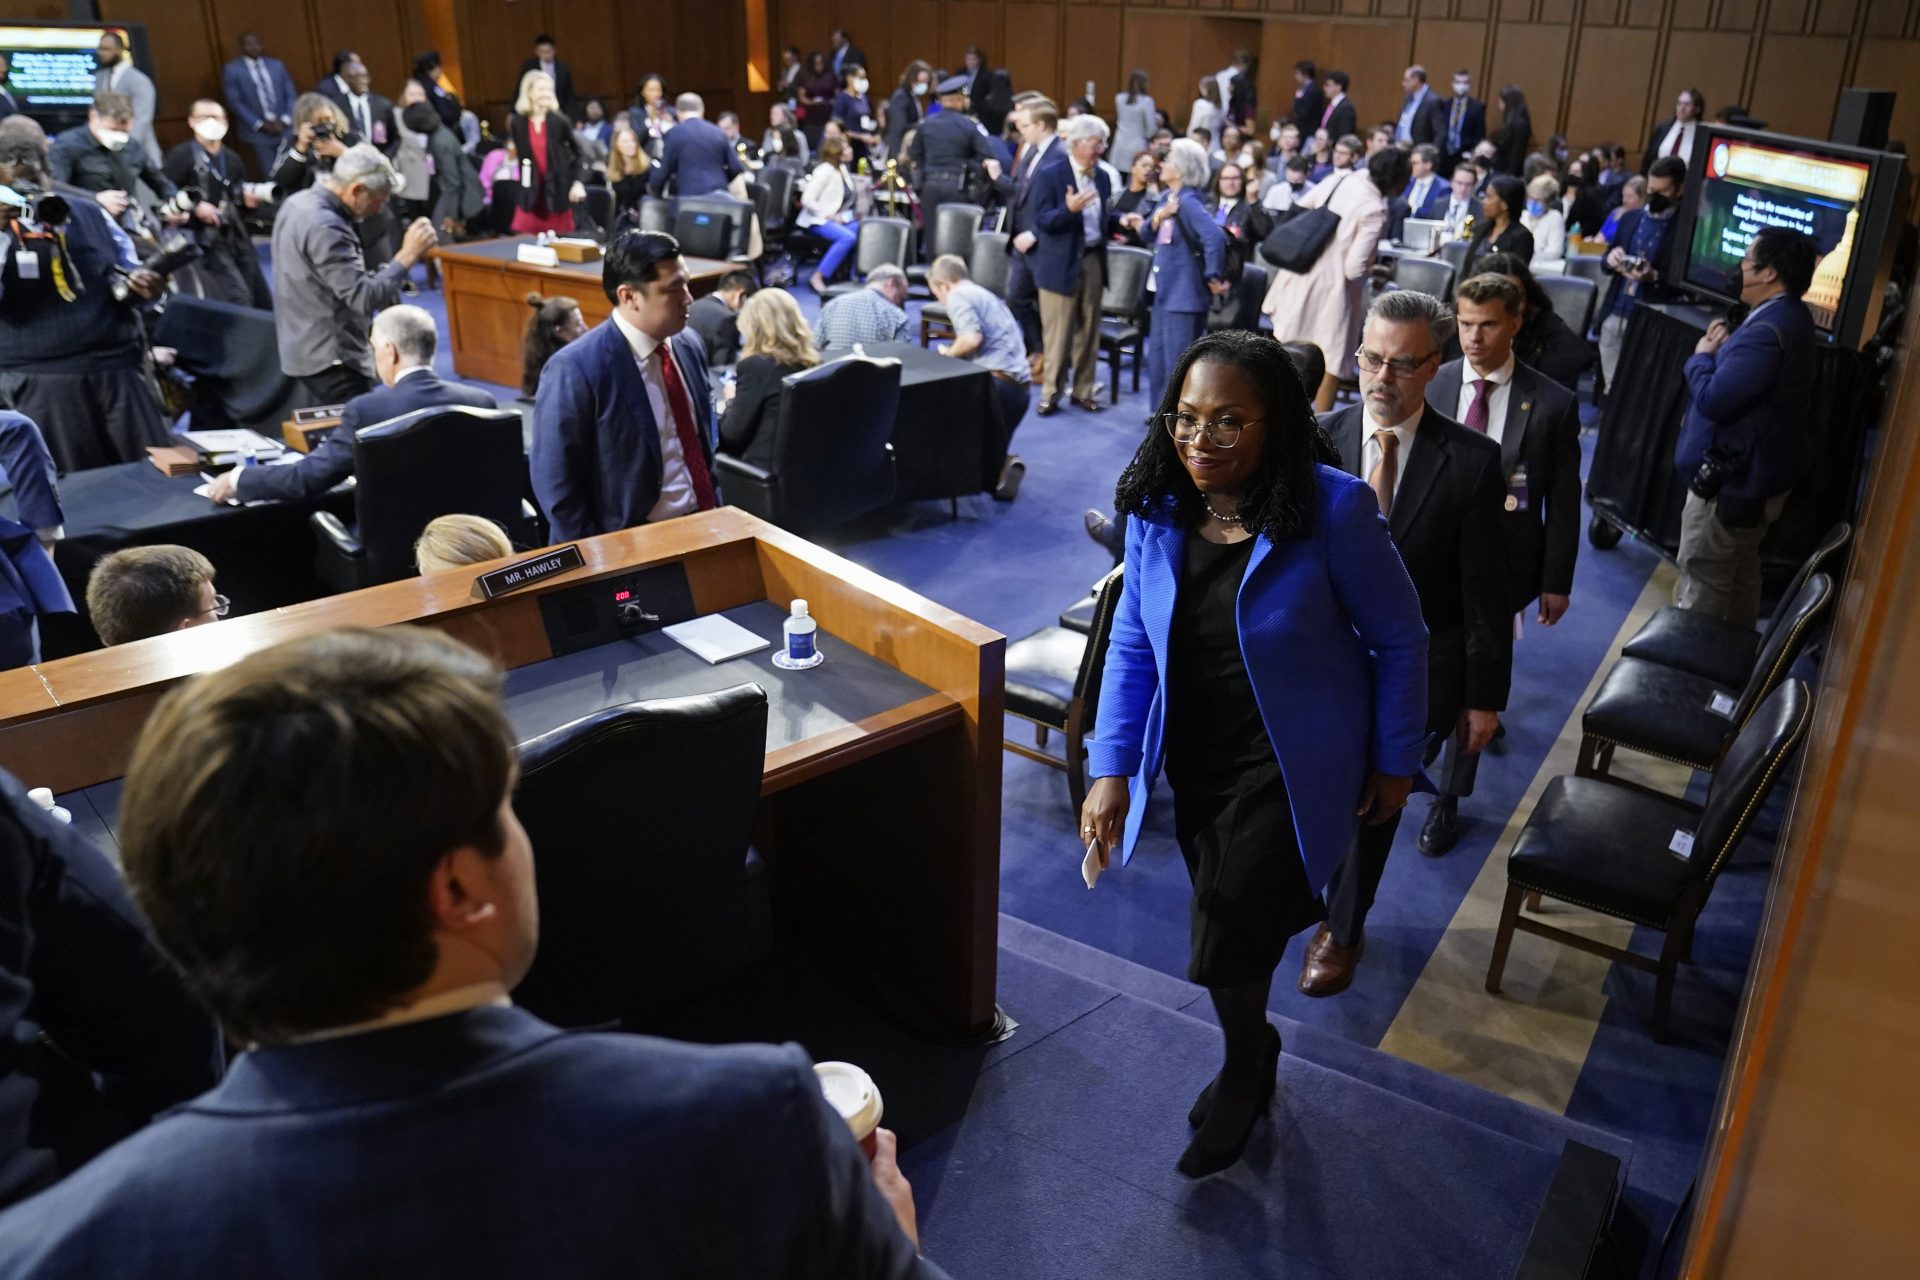 Supreme Court nominee Judge Ketanji Brown Jackson walks out of the room during a break in her testimony before the Senate Judiciary Committee on Capitol Hill in Washington, Wednesday, March 23, 2022, during her confirmation hearing.